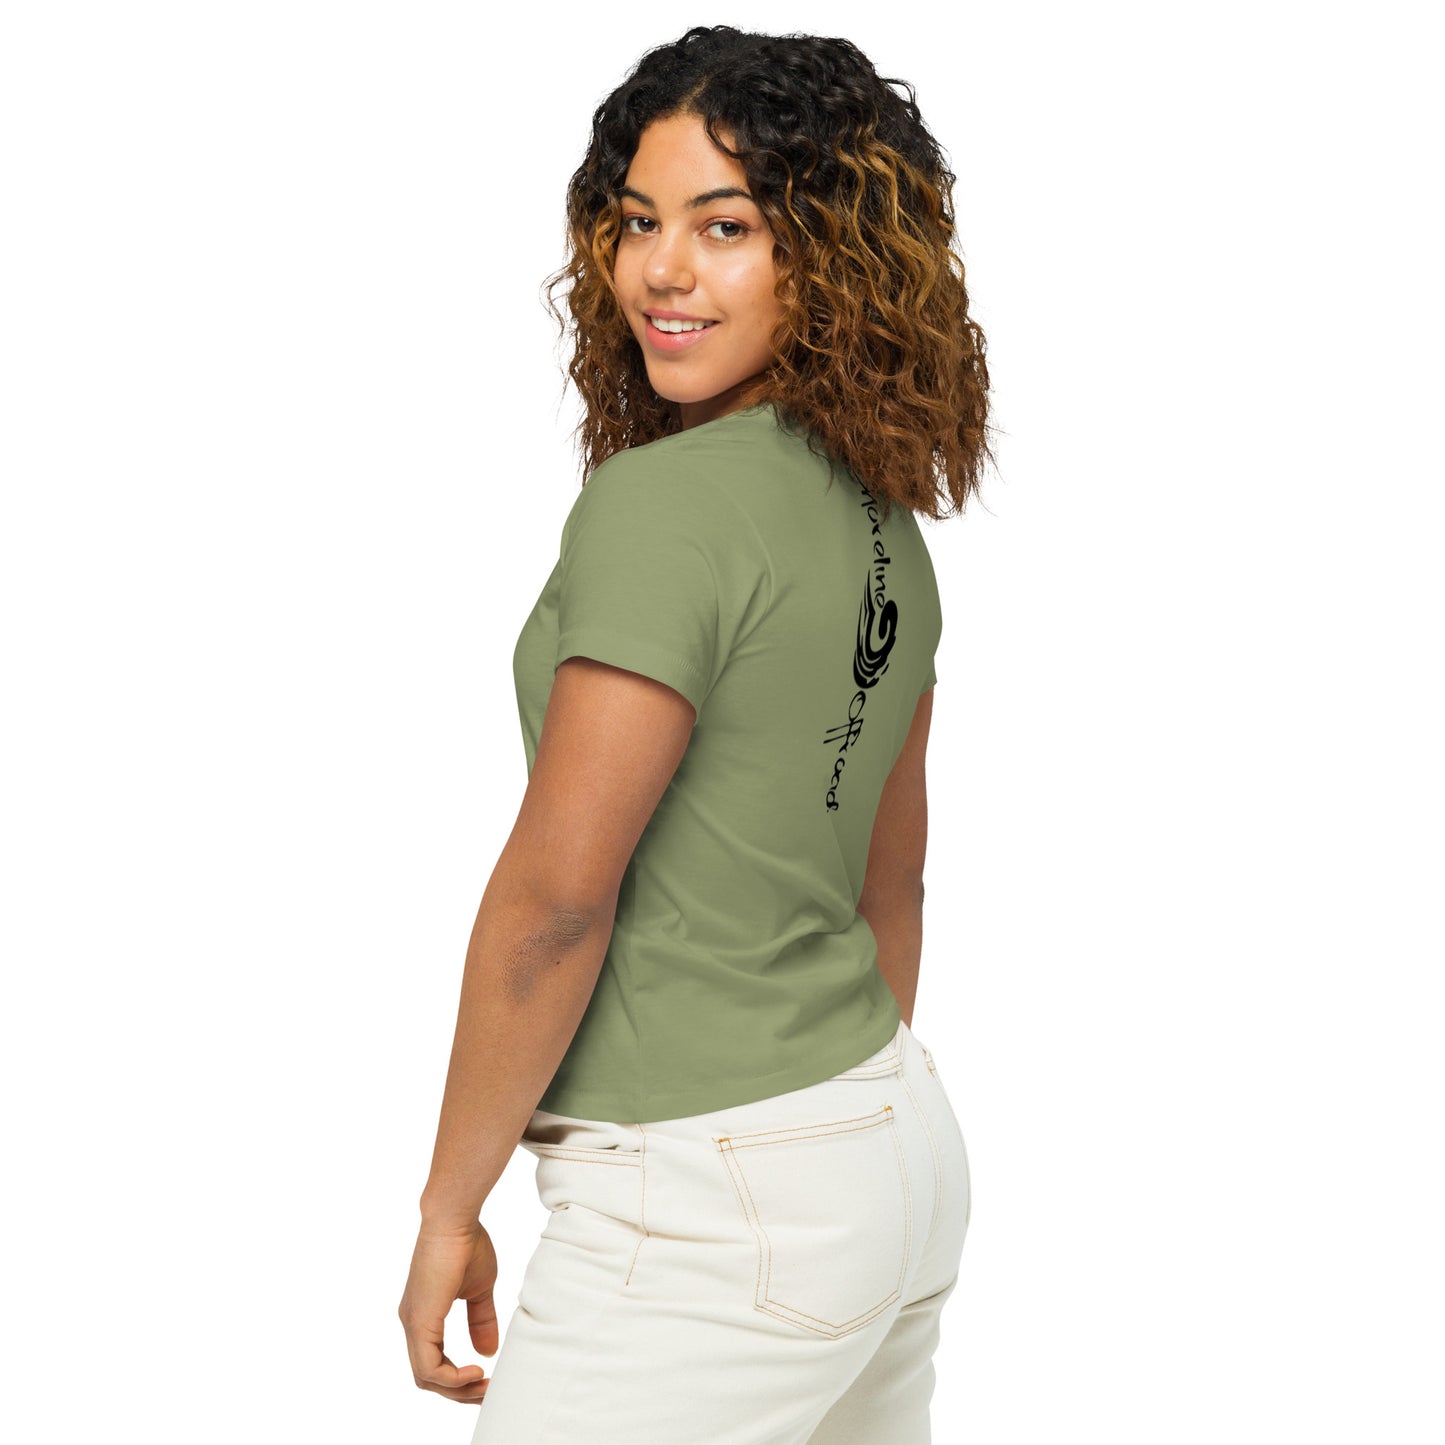 a woman wearing a green shirt and white pants